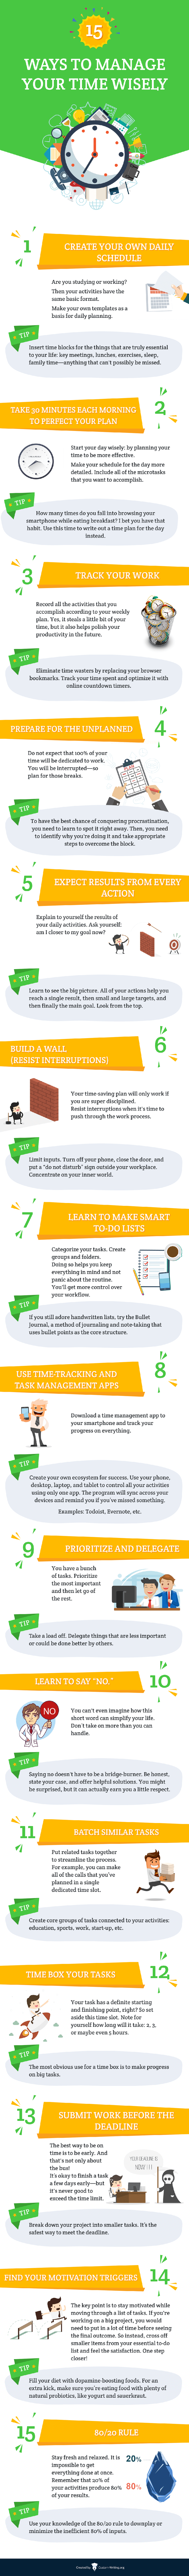 15 Ways to Manage Your Time - #infographic